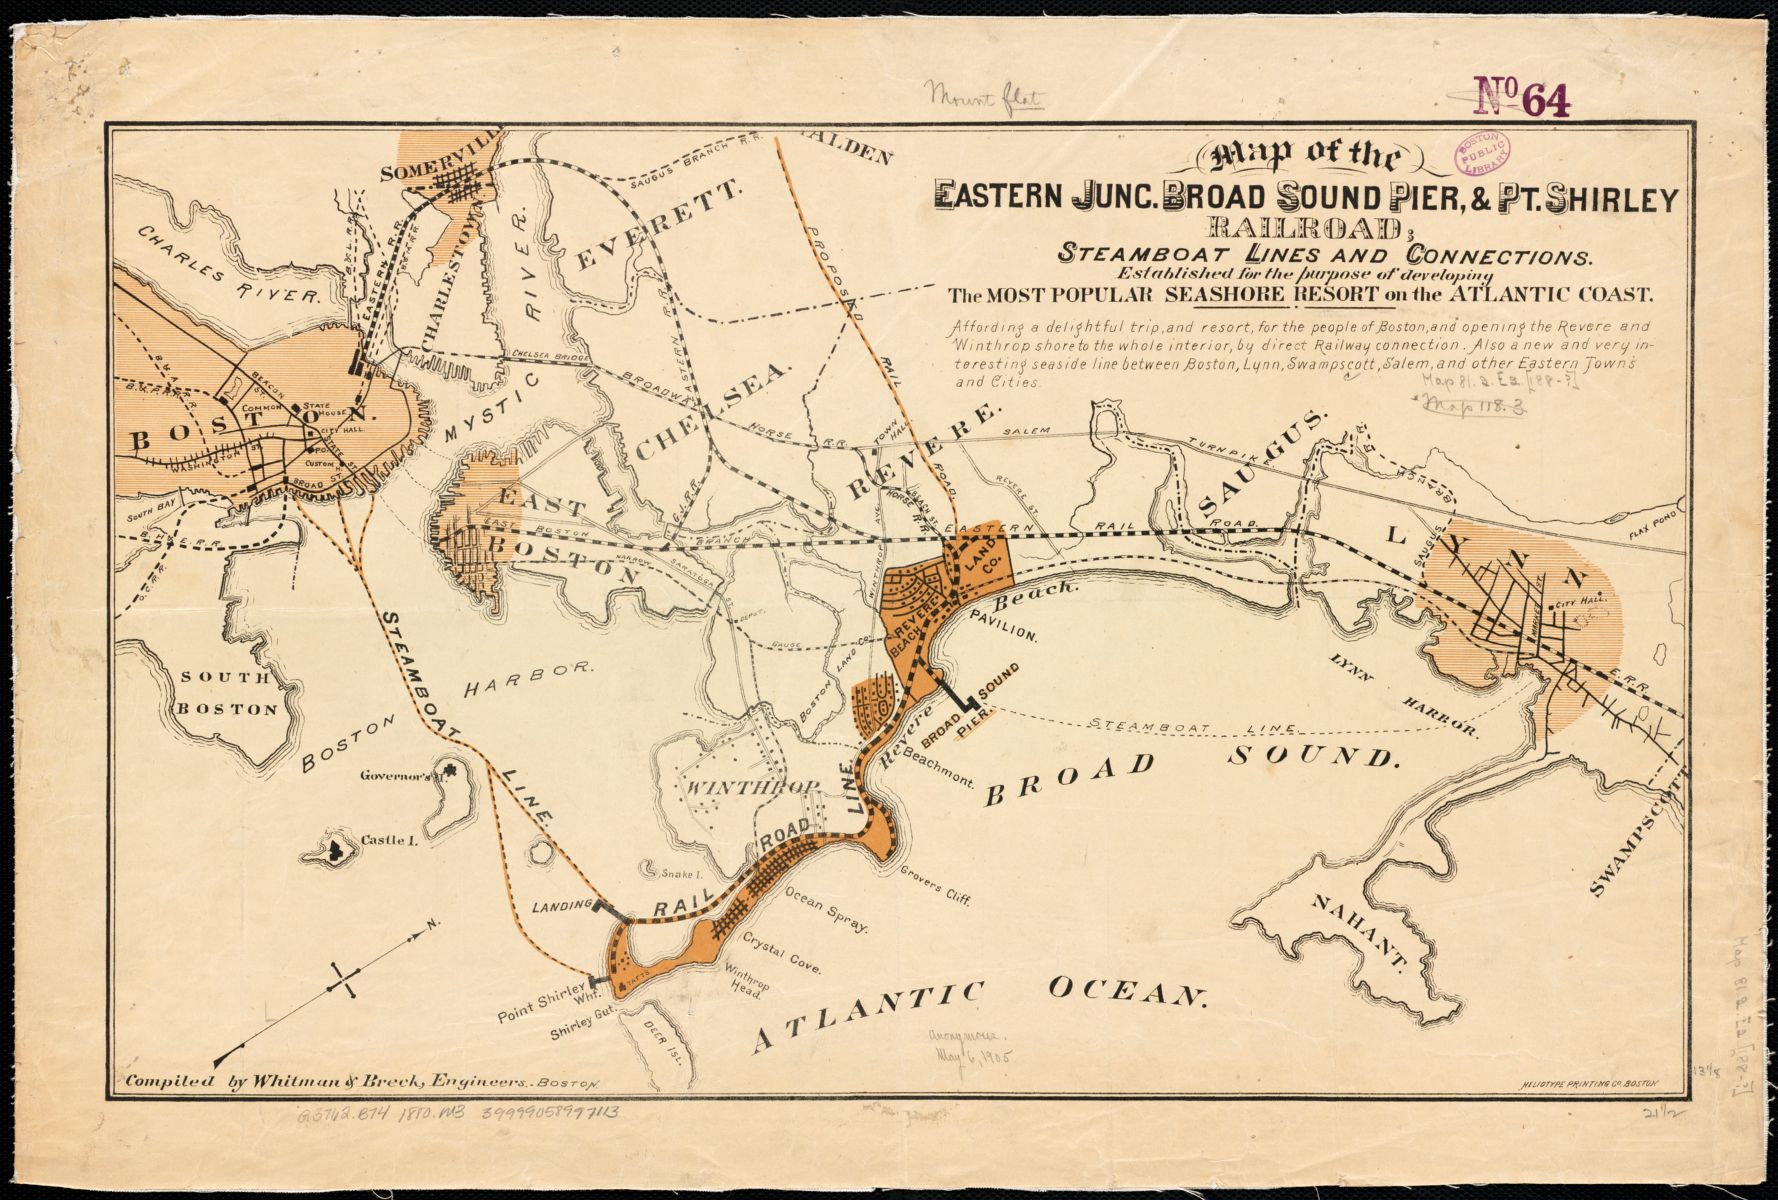 An 1880 map showing coastal destinations and the railroad links to Boston, and the empty space between them